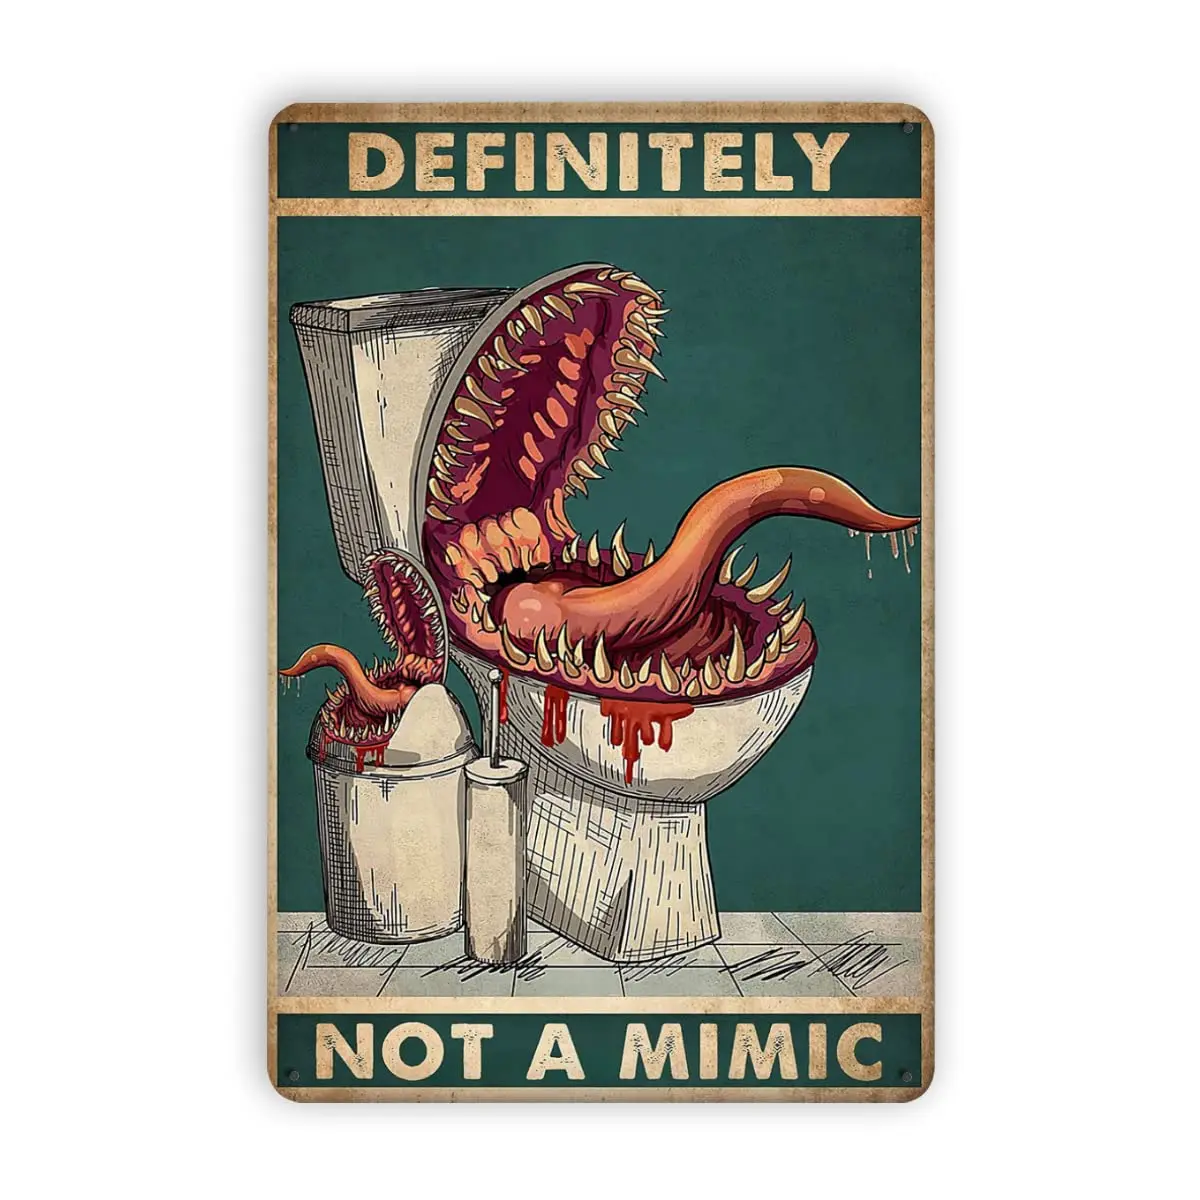 

Metal Tin Signs Metal Sign Definitely Not A Mimic Poster Dice Game Poster Halloween Living Toilet Decor Poster Wall Panel Retro